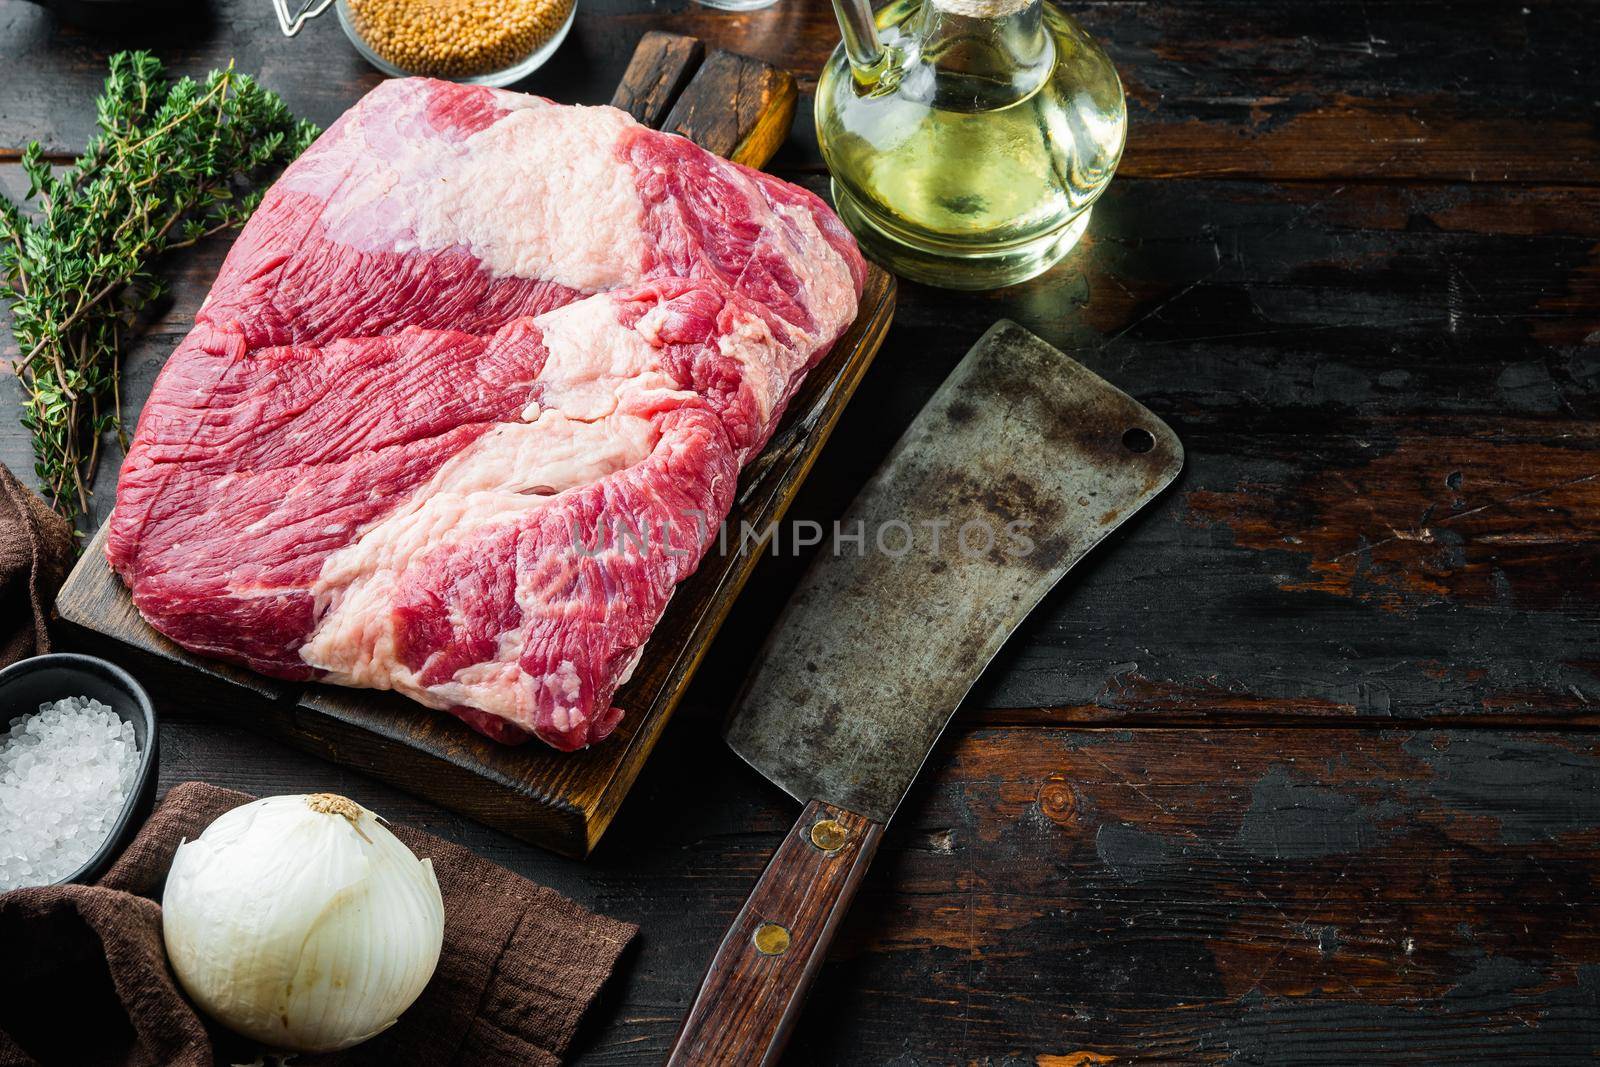 Point brisket, raw beef brisket meat,with ingredients for smoking making barbecue, pastrami, cure, on old dark wooden table background, with copy space for text by Ilianesolenyi